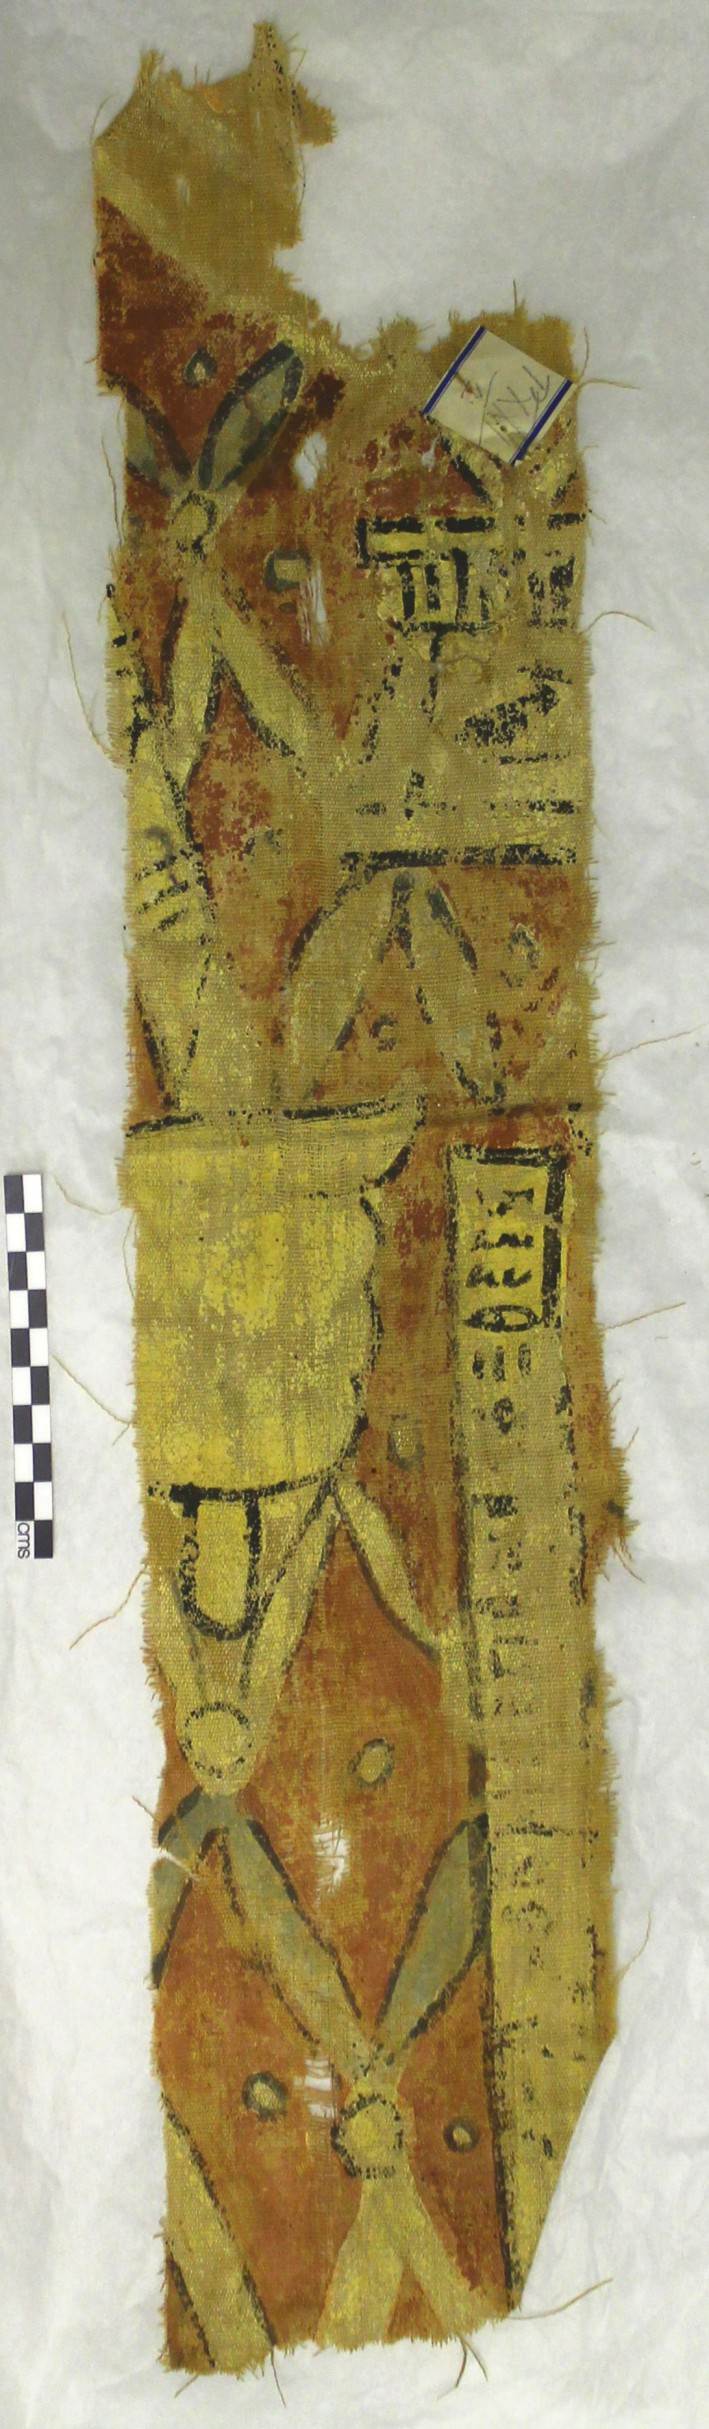 Image for: Fragment of linen from a shroud